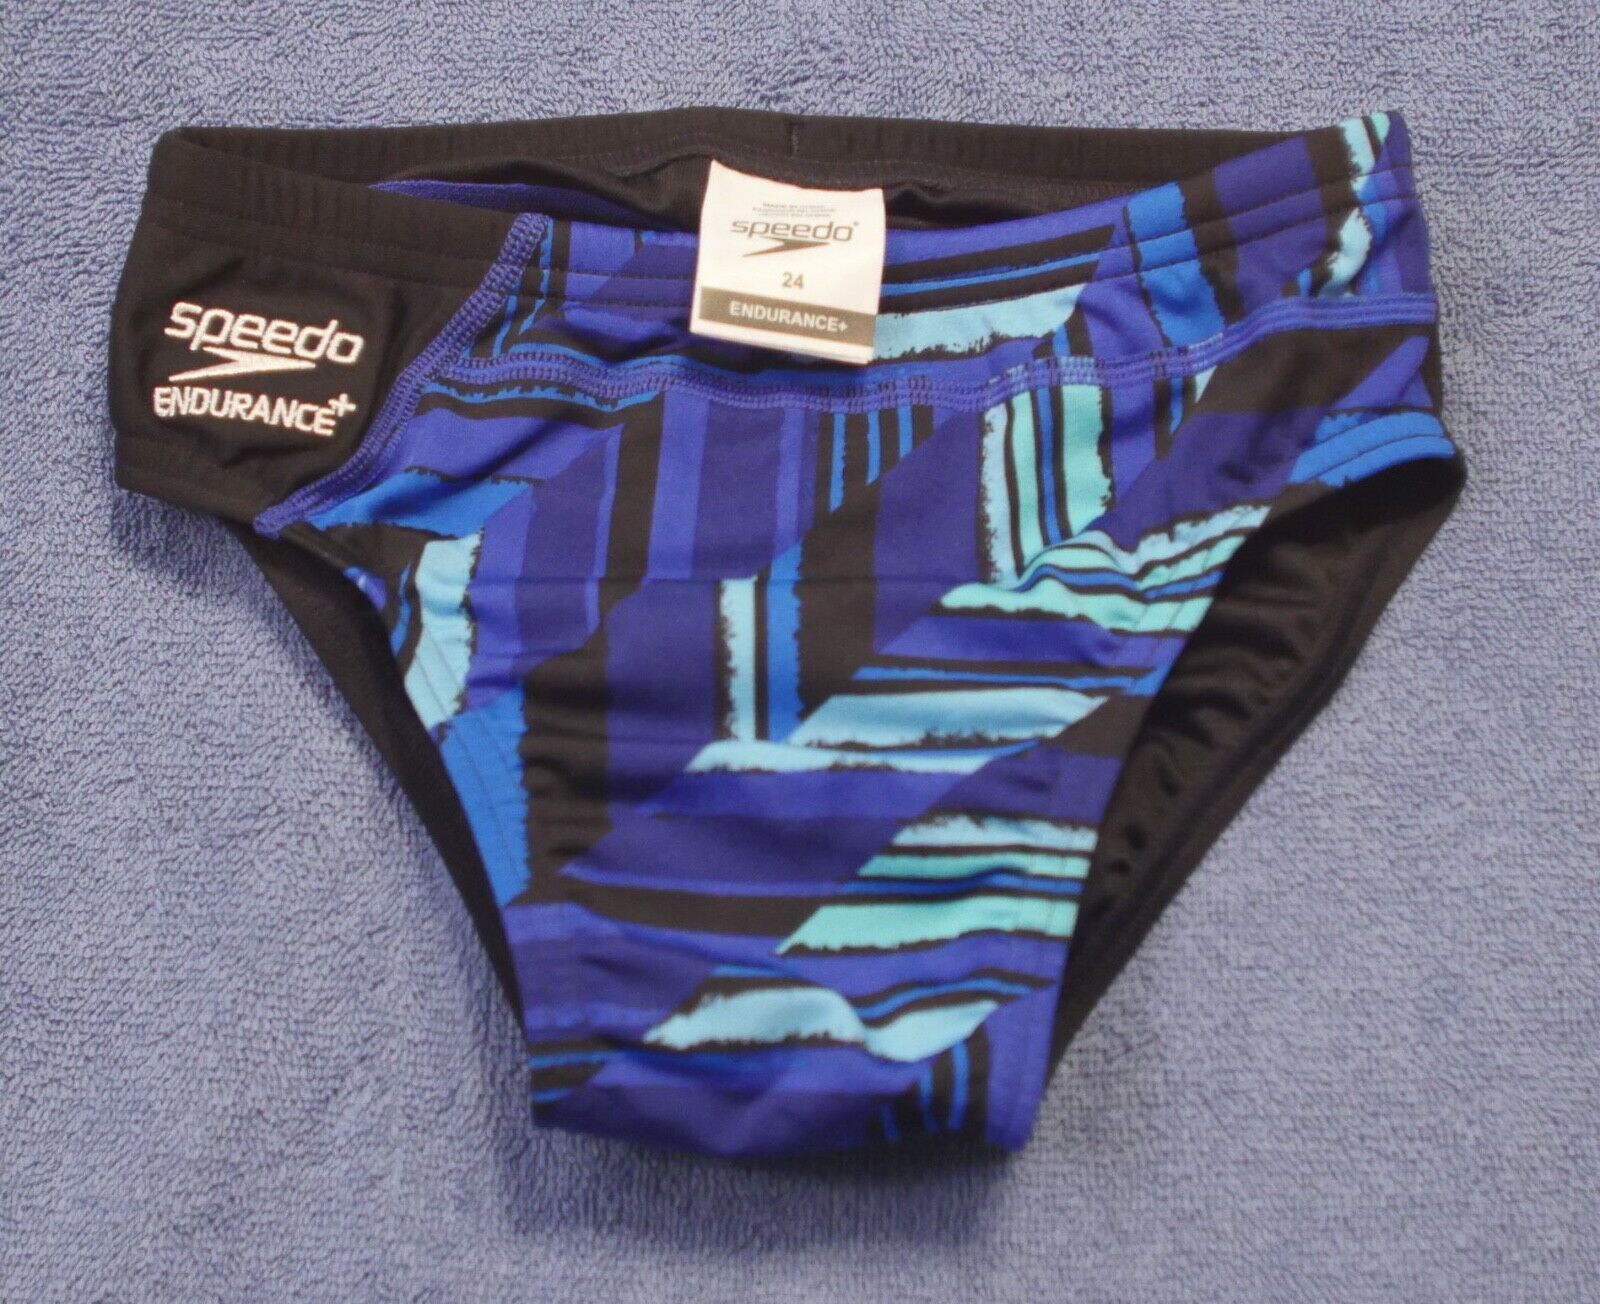 Boys Navy swim trunks Speedo Endurance 24"New with Tags in original package 